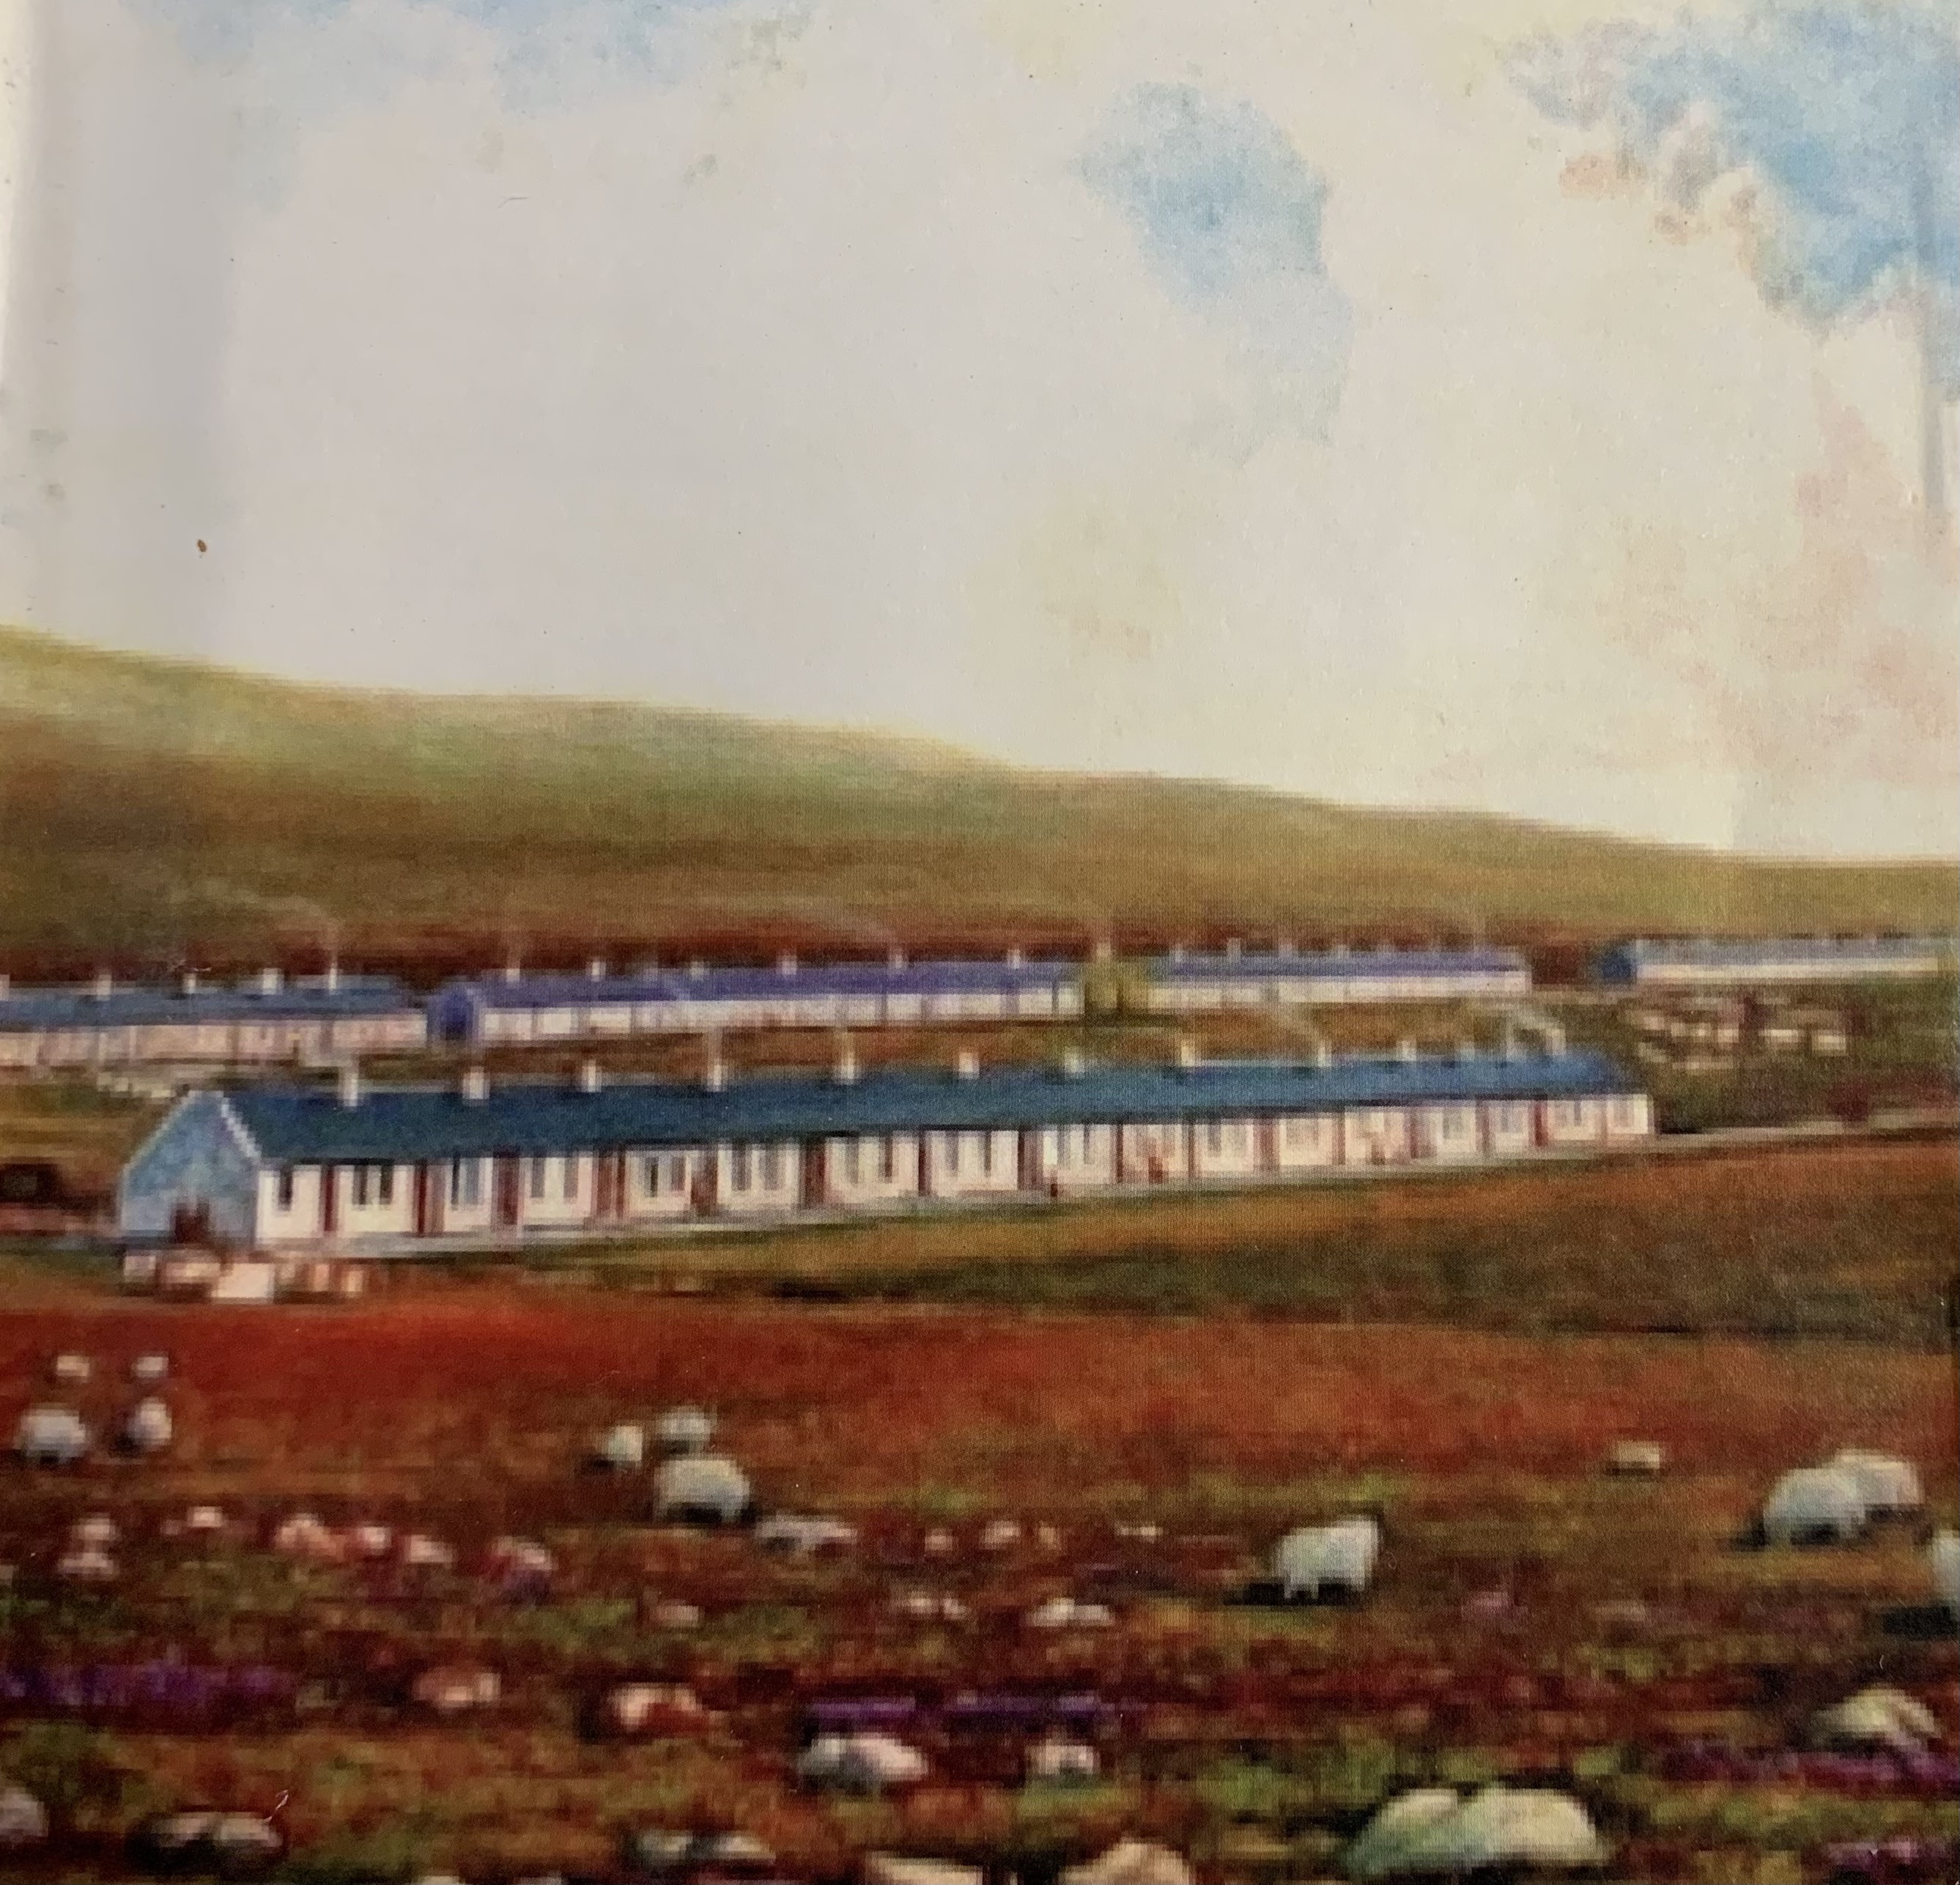 Photo of a paining showing sheep on the hills in the foreground to two rows on white housing with pitched roofs and a hill in the background depicting the lost mining village of Benwhat 